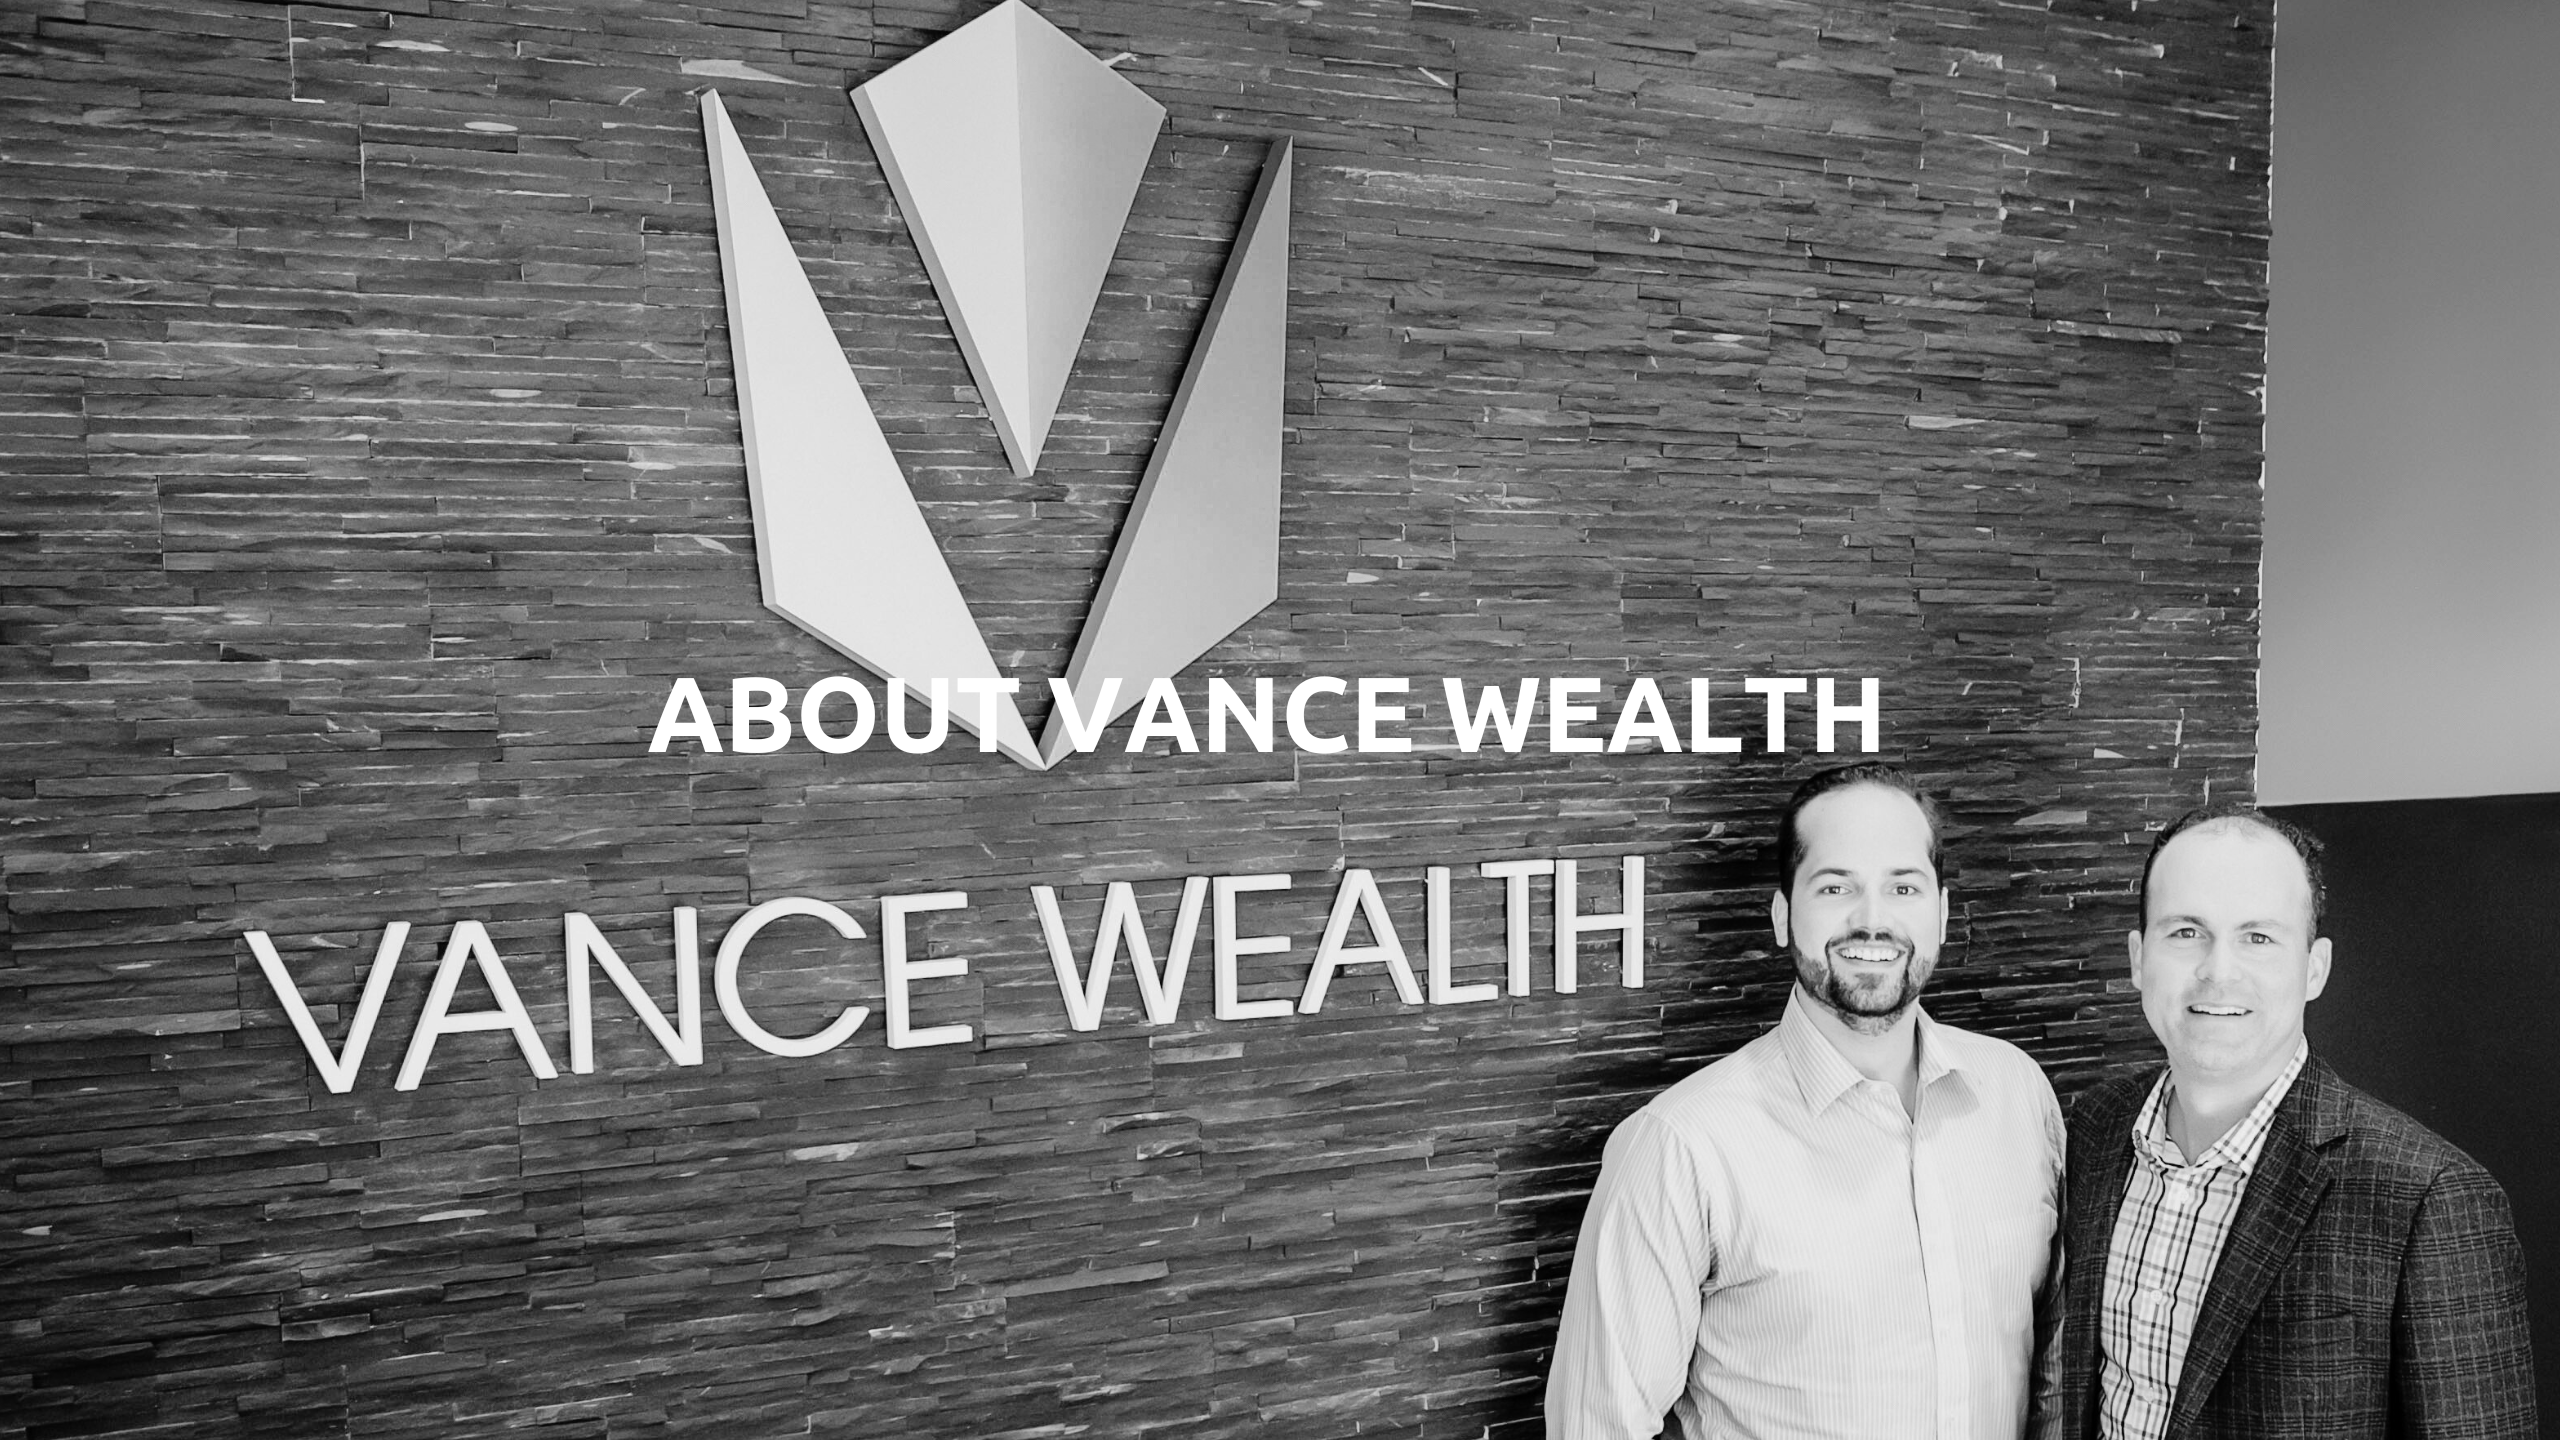 About Vance Wealth